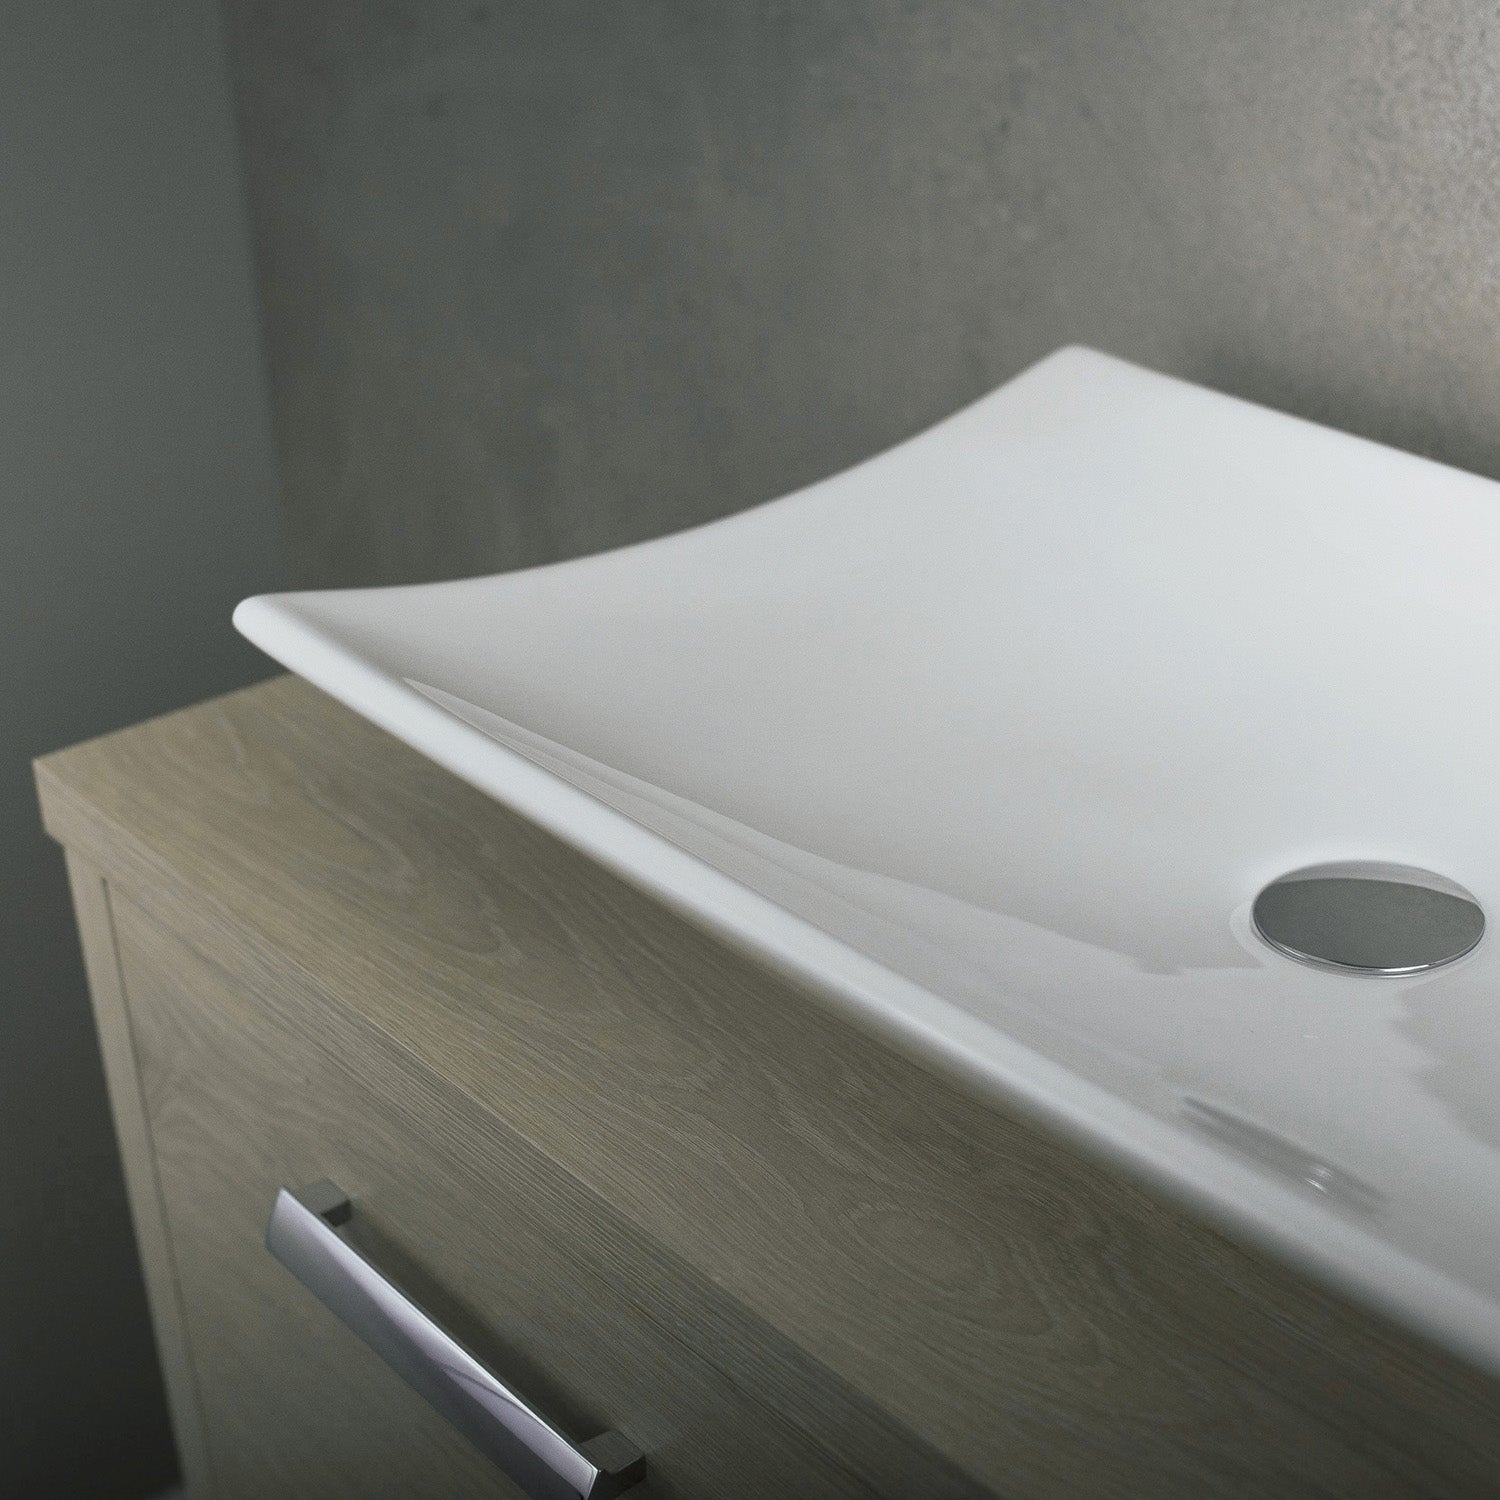 DAX Ceramic Rectangle Single Bowl Bathroom Vessel Sink, White Finish, 23-3/4 x 15-3/8 x 4-1/2 Inches (BSN-CL1056)